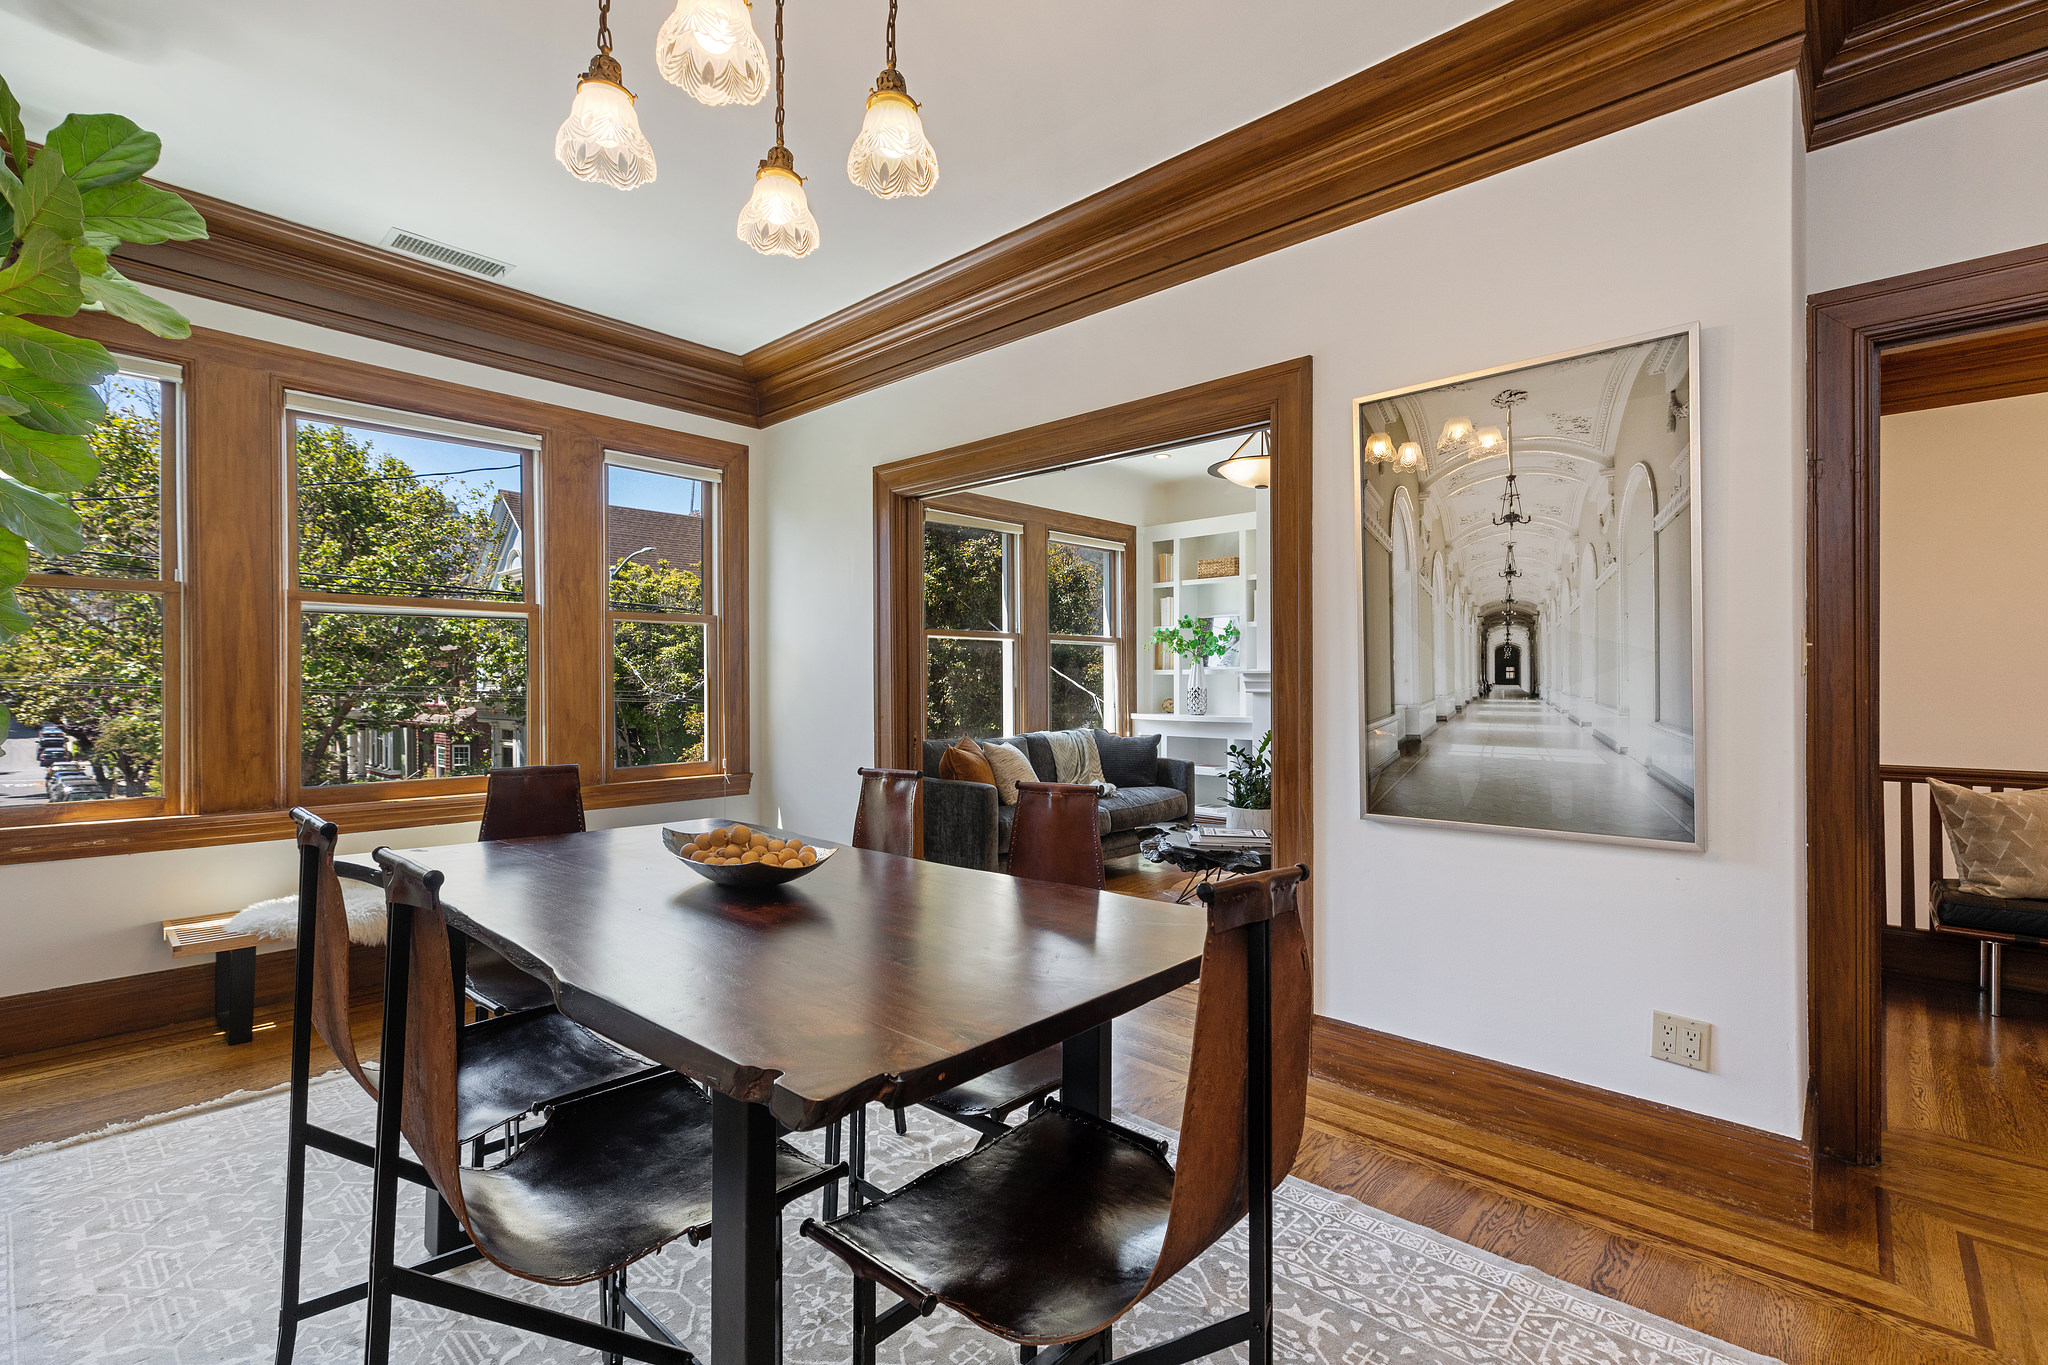 Property Photo: Dining room, showing three large windows and entrance into the living room